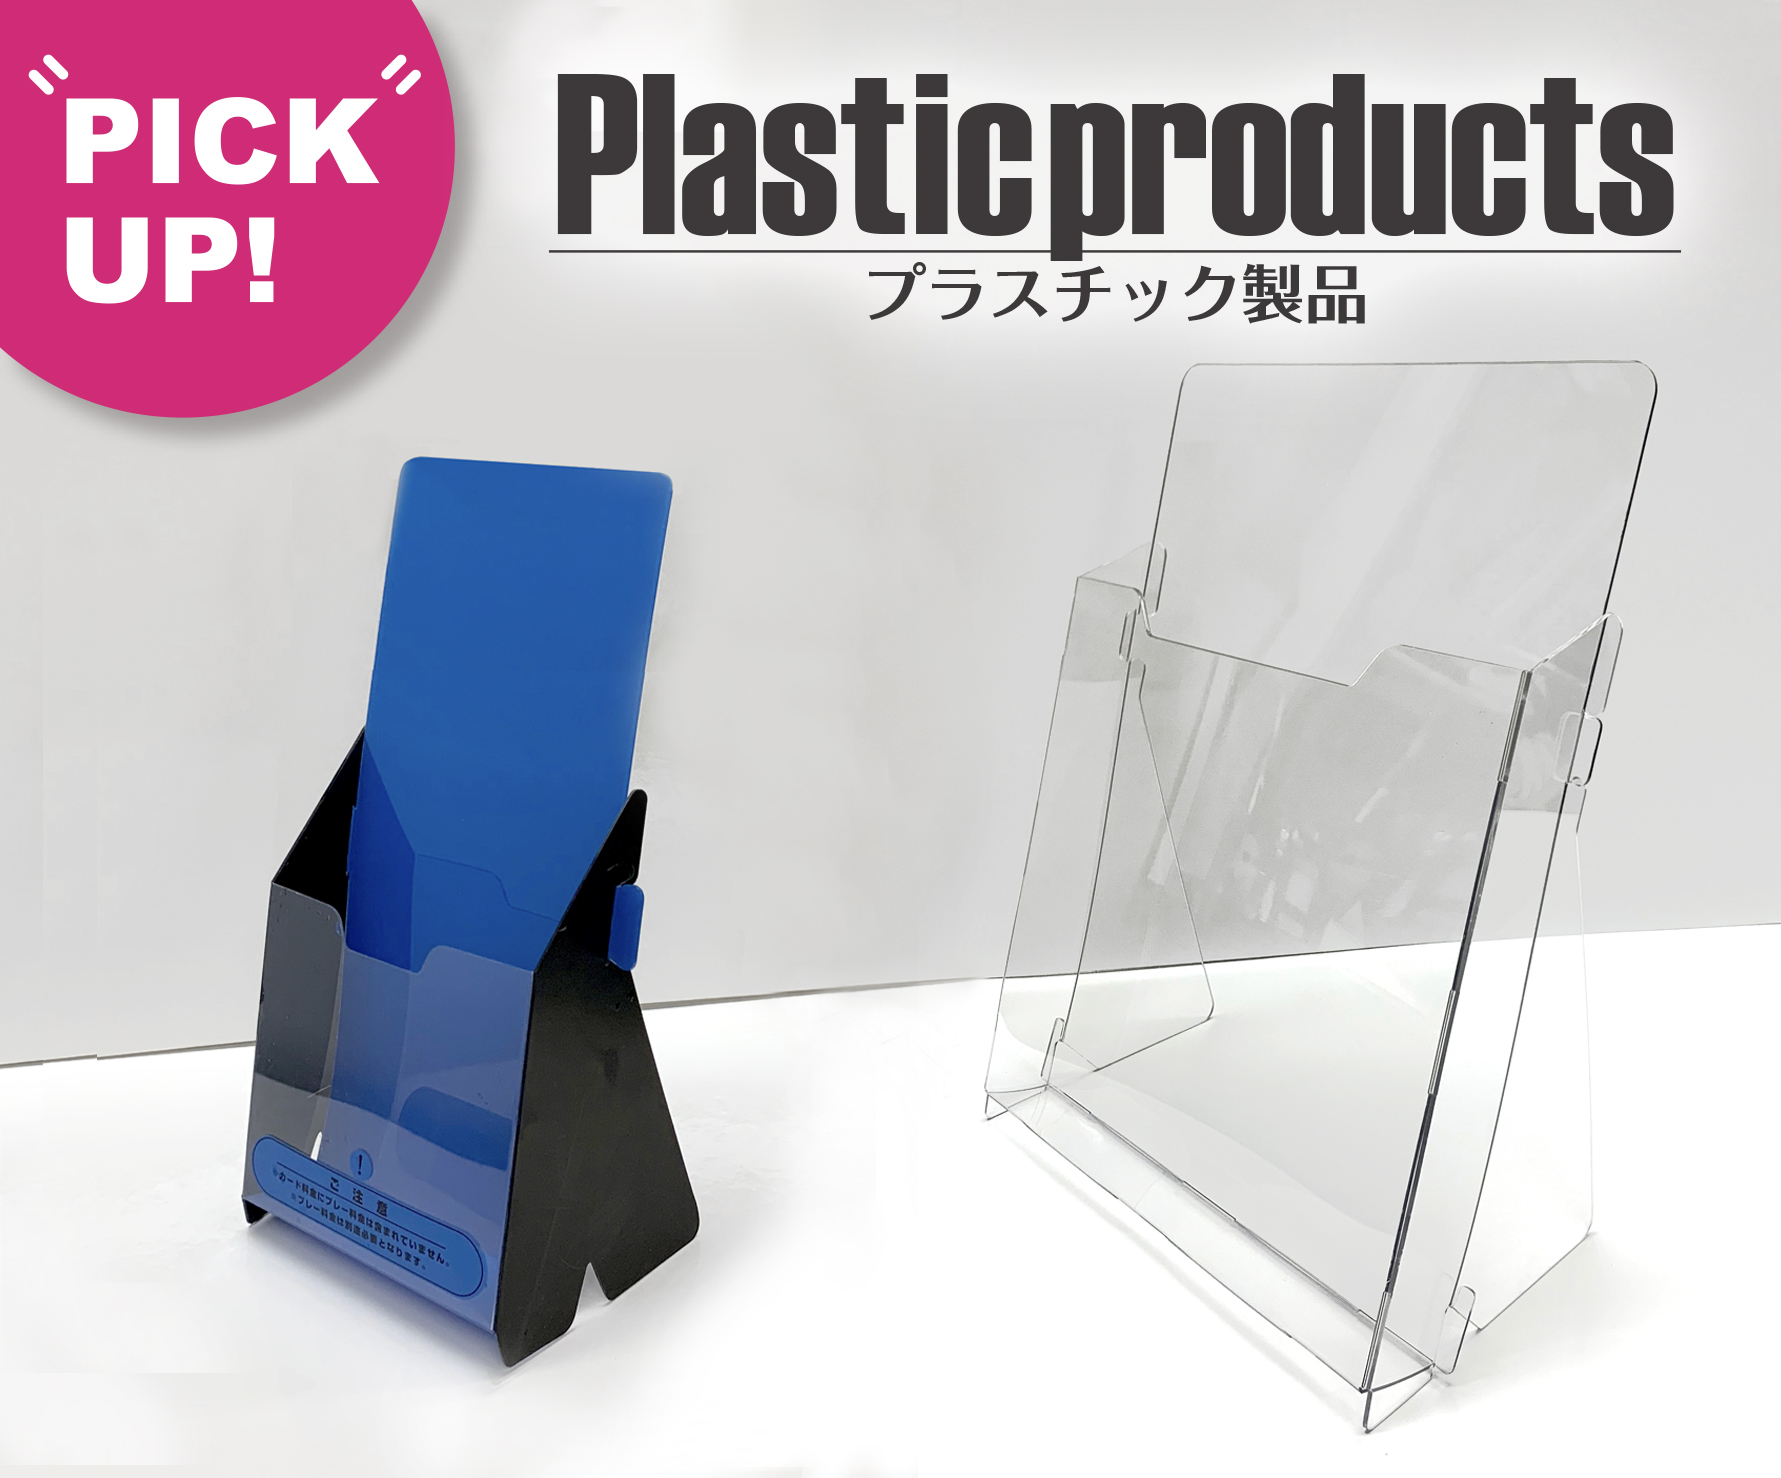 Plasticproducts